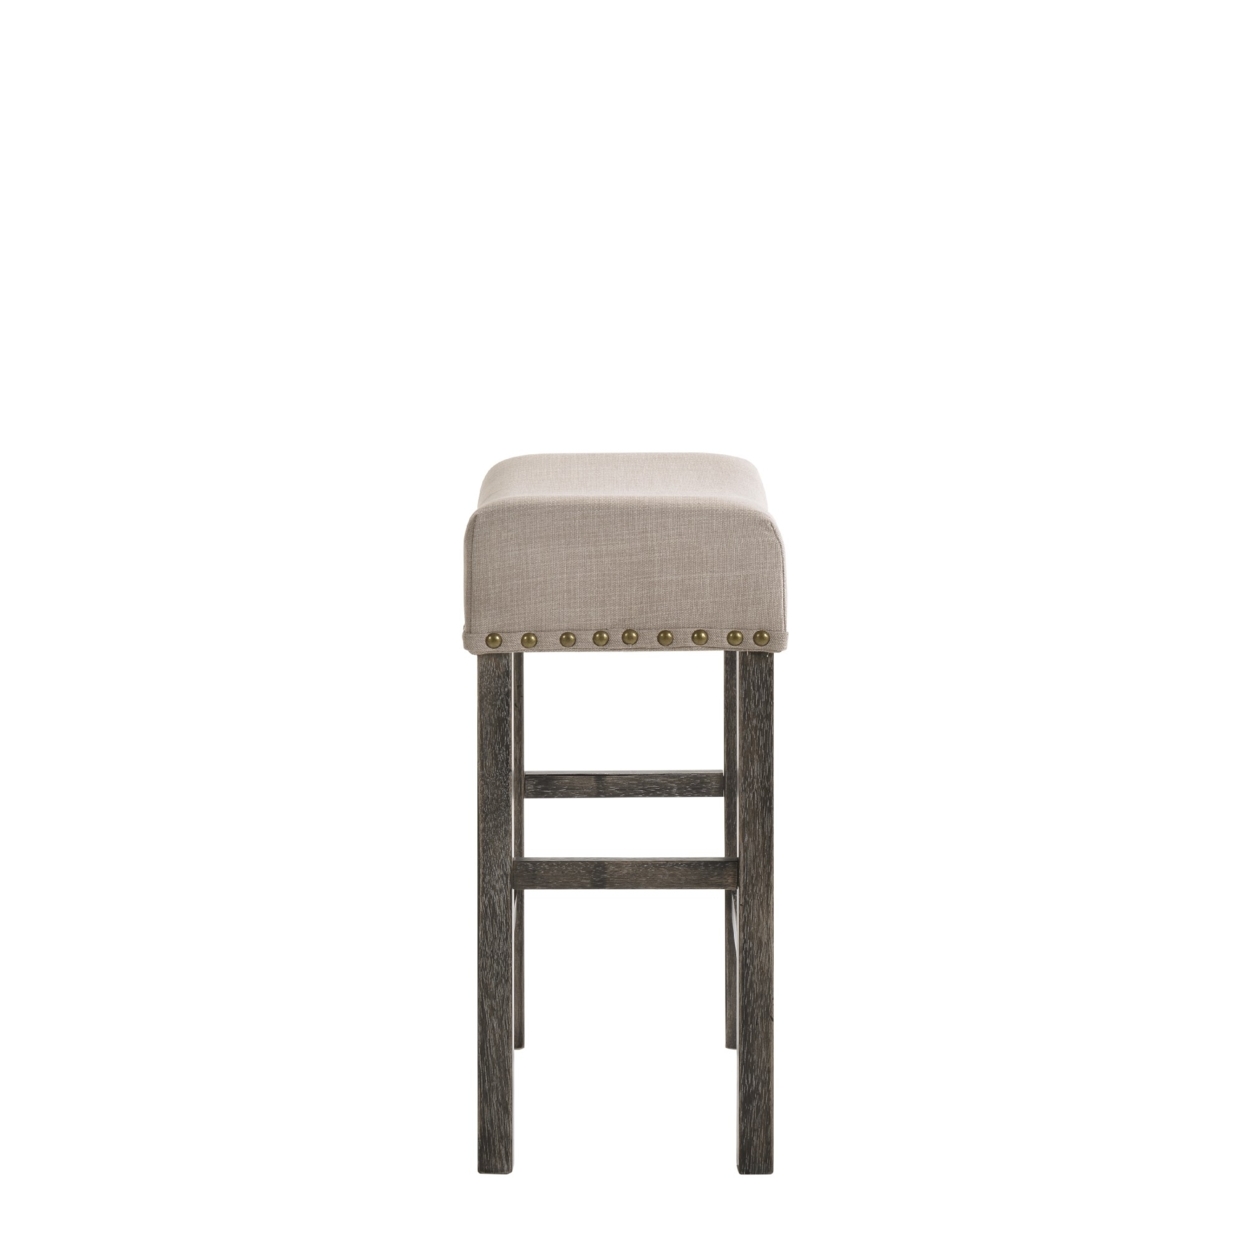 Wooden Counter Height Stool With Linen Upholstered Saddle Seat, Set Of 2, Beige And Gray- Saltoro Sherpi